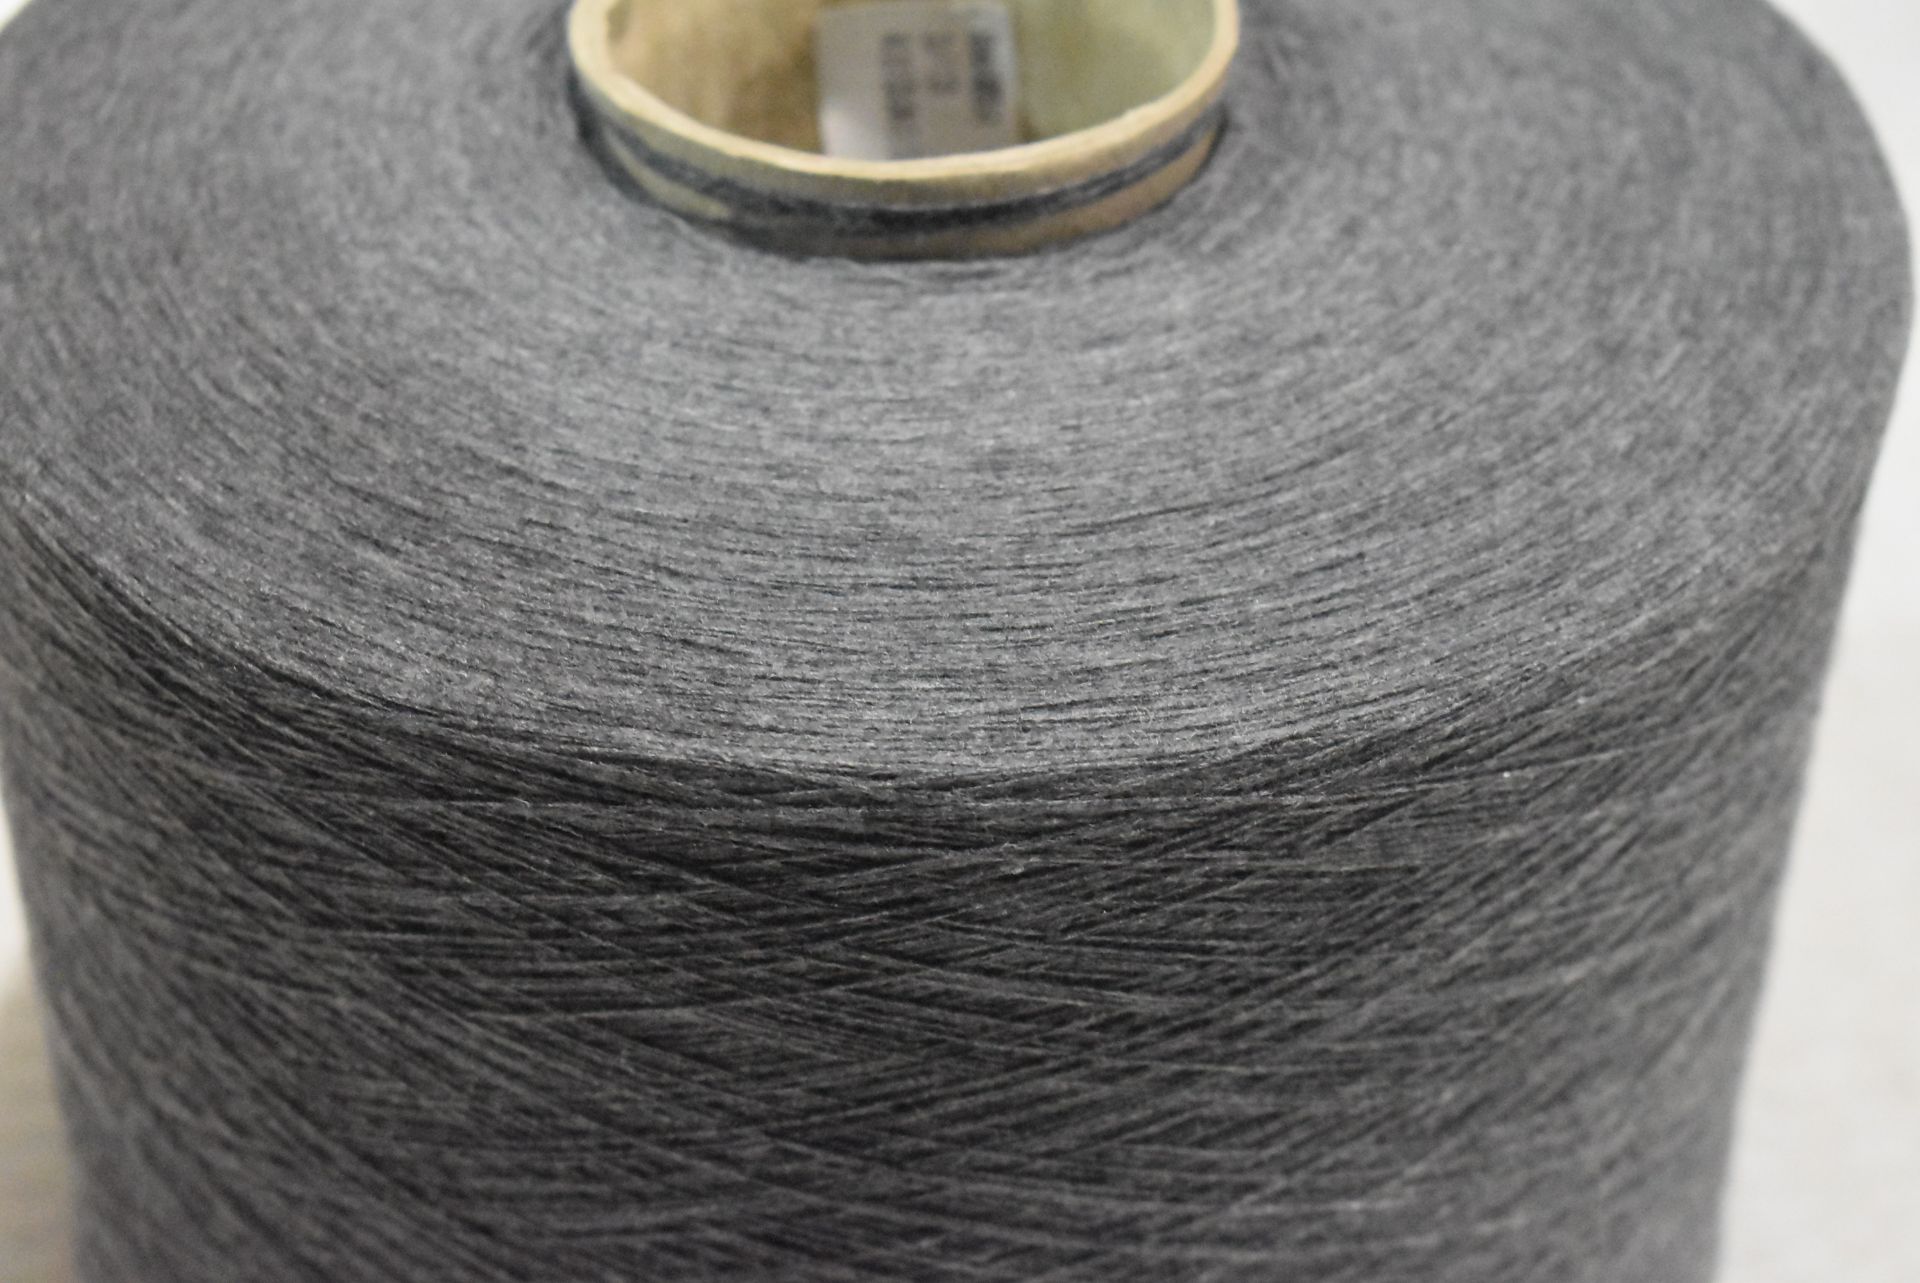 4 x Cones of 1/13 MicroCotton Knitting Yarn - Mid Grey - Approx Weight: 2,500g - New Stock ABL Yarn - Image 7 of 17